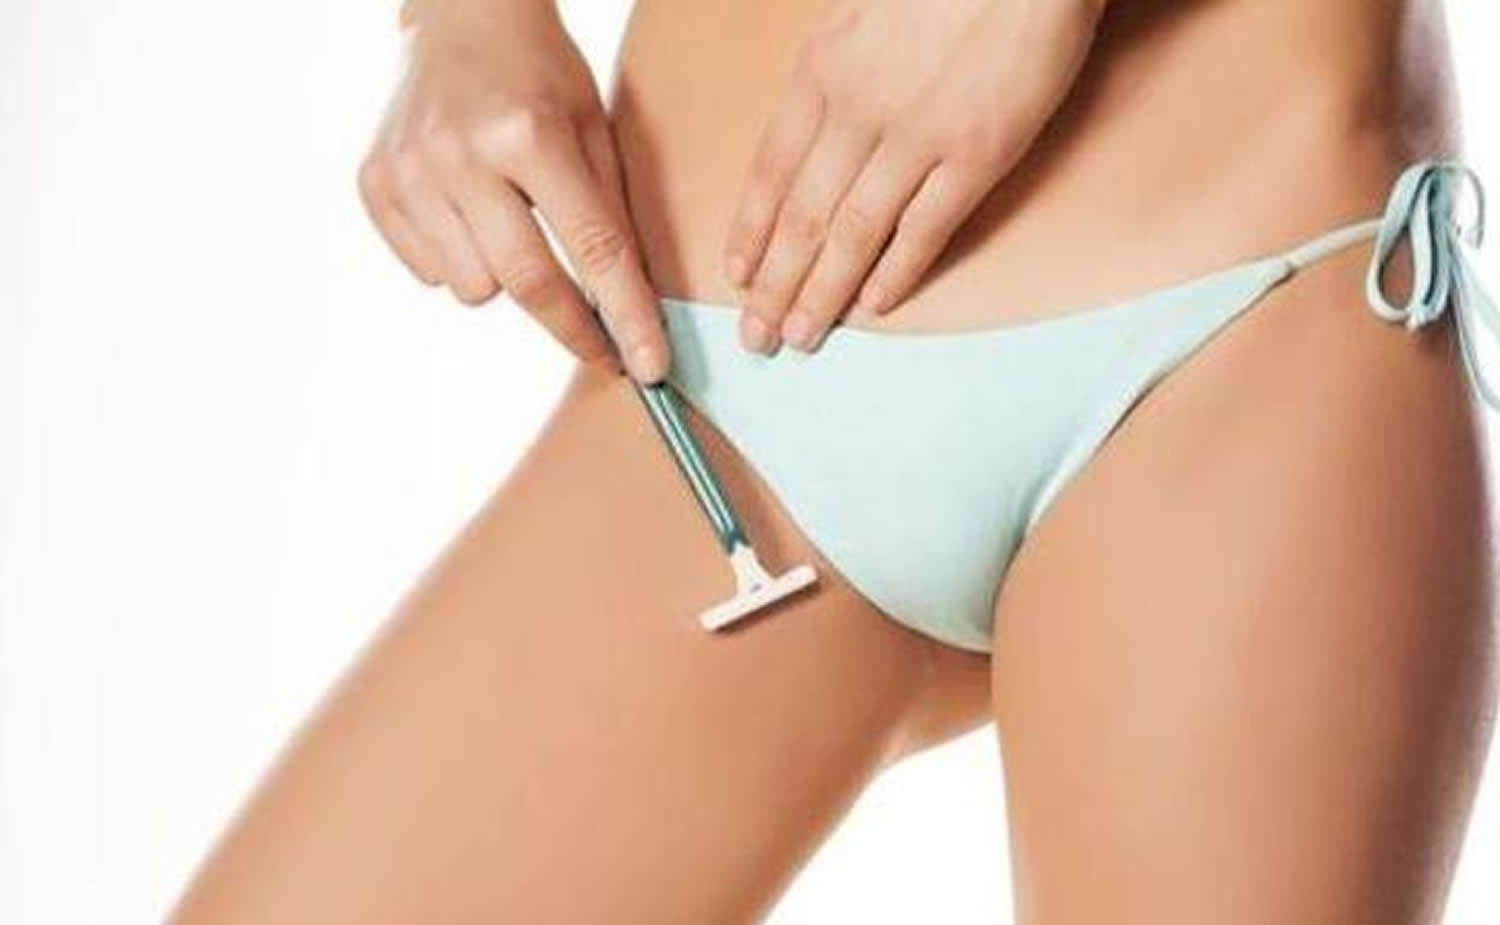 Shaving Pubic Hair In Men & Women - What Are The Risks